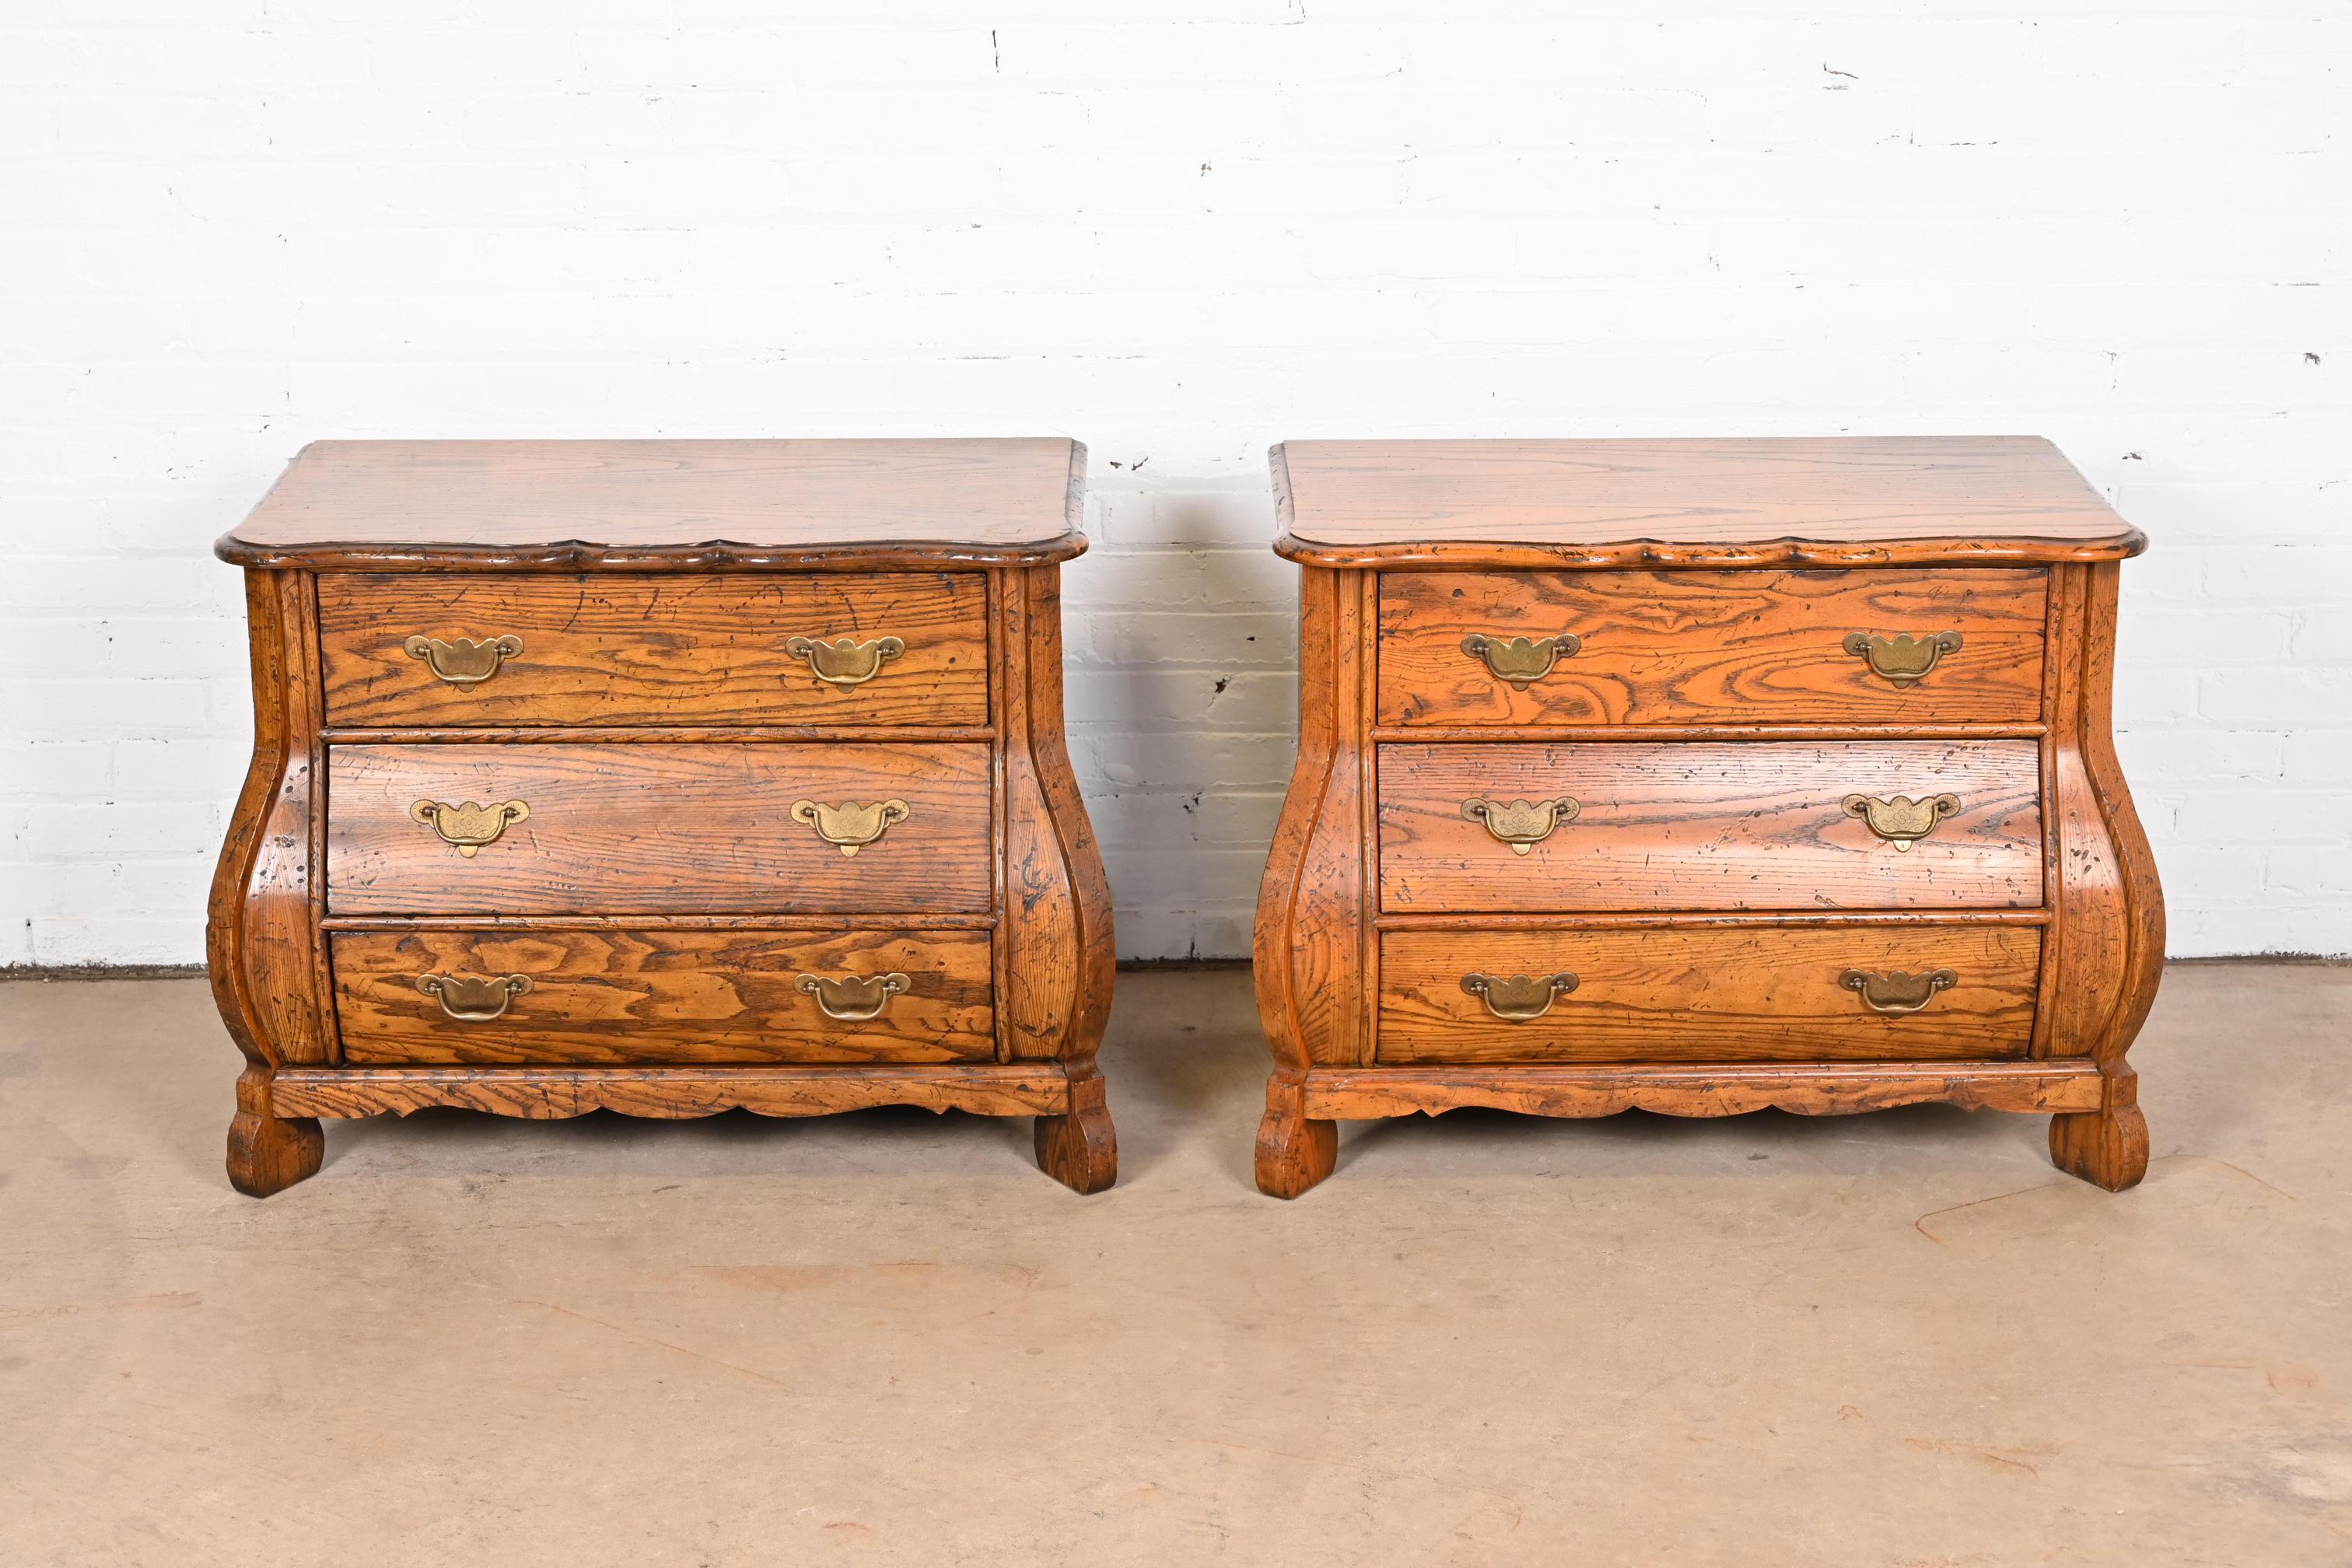 A beautiful pair of French Provincial Louis XV style bombay chests, commodes, or bedside chests

By Baker Furniture, 